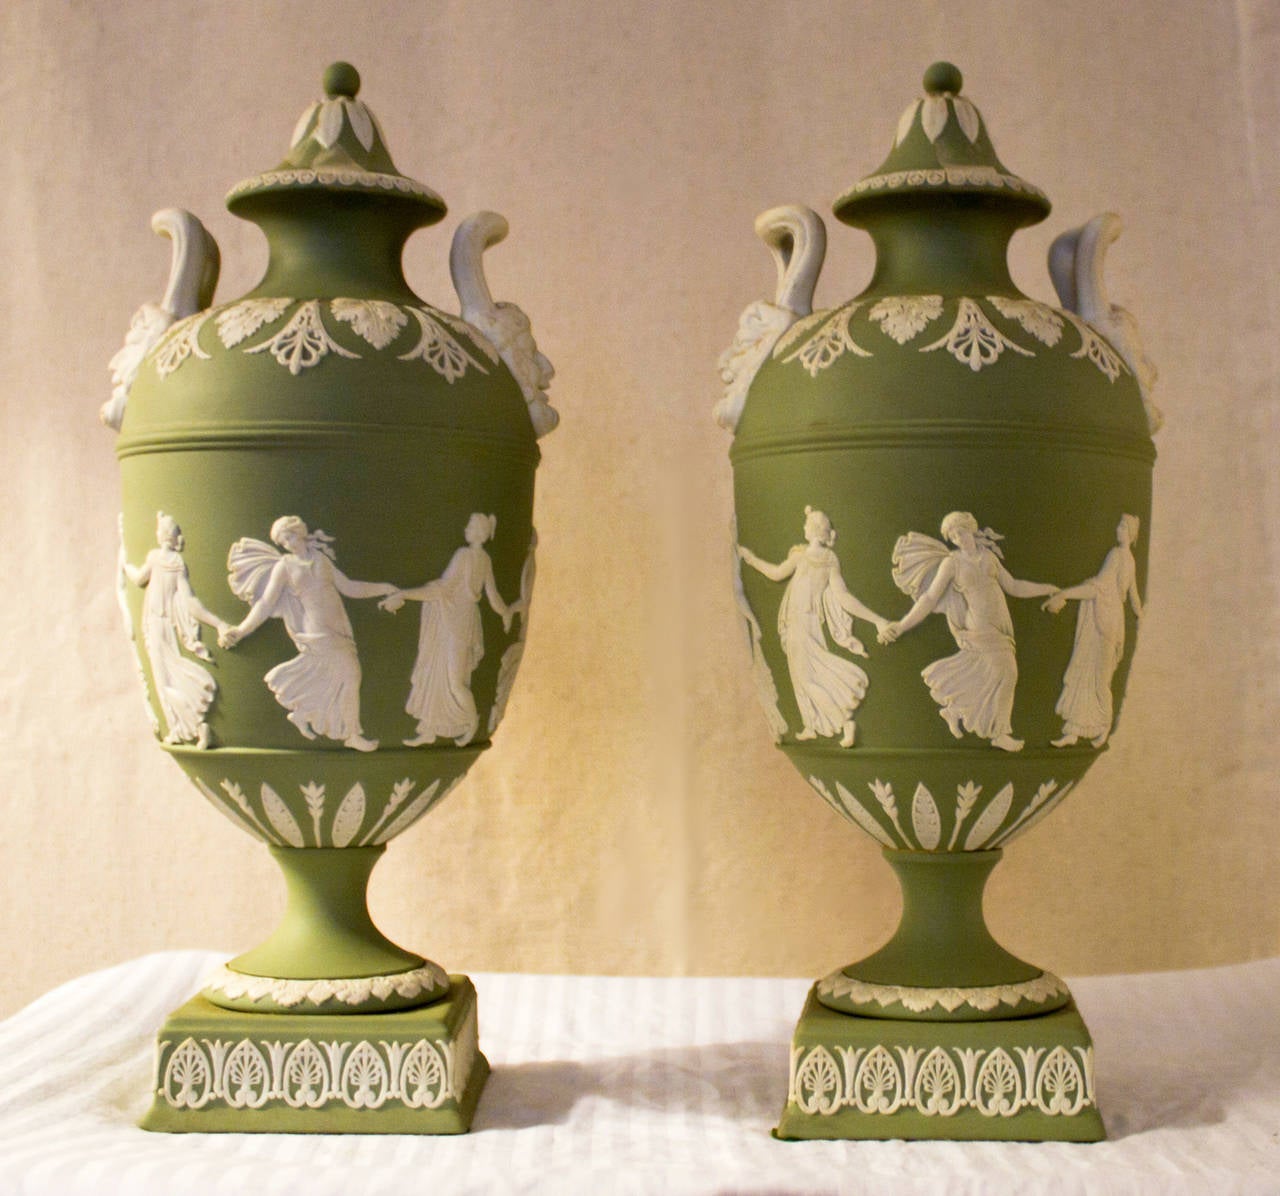 Pair of pale green Jasperware presentation lidded urns feature a white bas-relief ornamentation depicting Neoclassical Greek revival muses. The delicate handles on either side are molded over Bacchus heads and classical designs outline the lid and